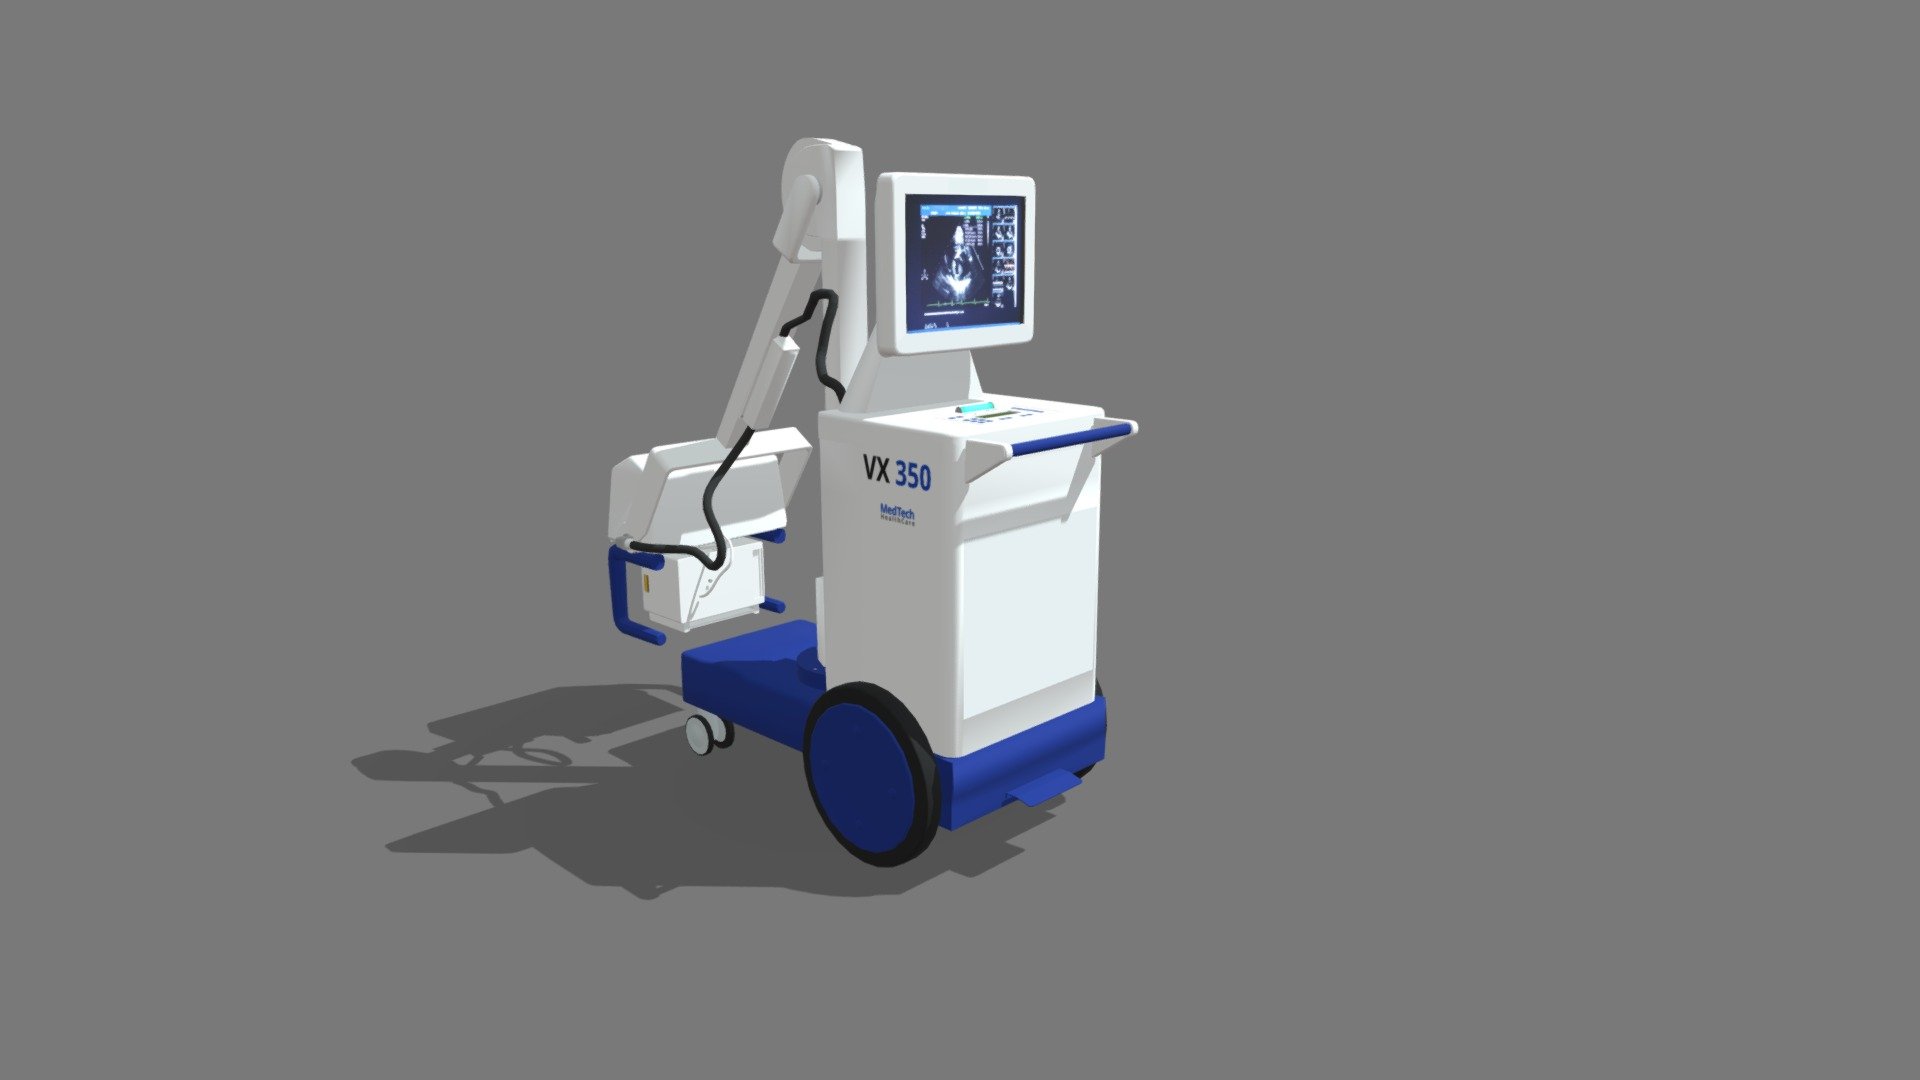 Medical X-Ray device. Portable room model. Textures provided so you can re-brand.

Provided Blender files, which have been rigged with basic hierarchies. FBX files are animated, and may be opened in other DCC applications and re-animated with some modifications. Blender file has splines that can be more easily rigged to create tubing with thickness in the render settings 3d model